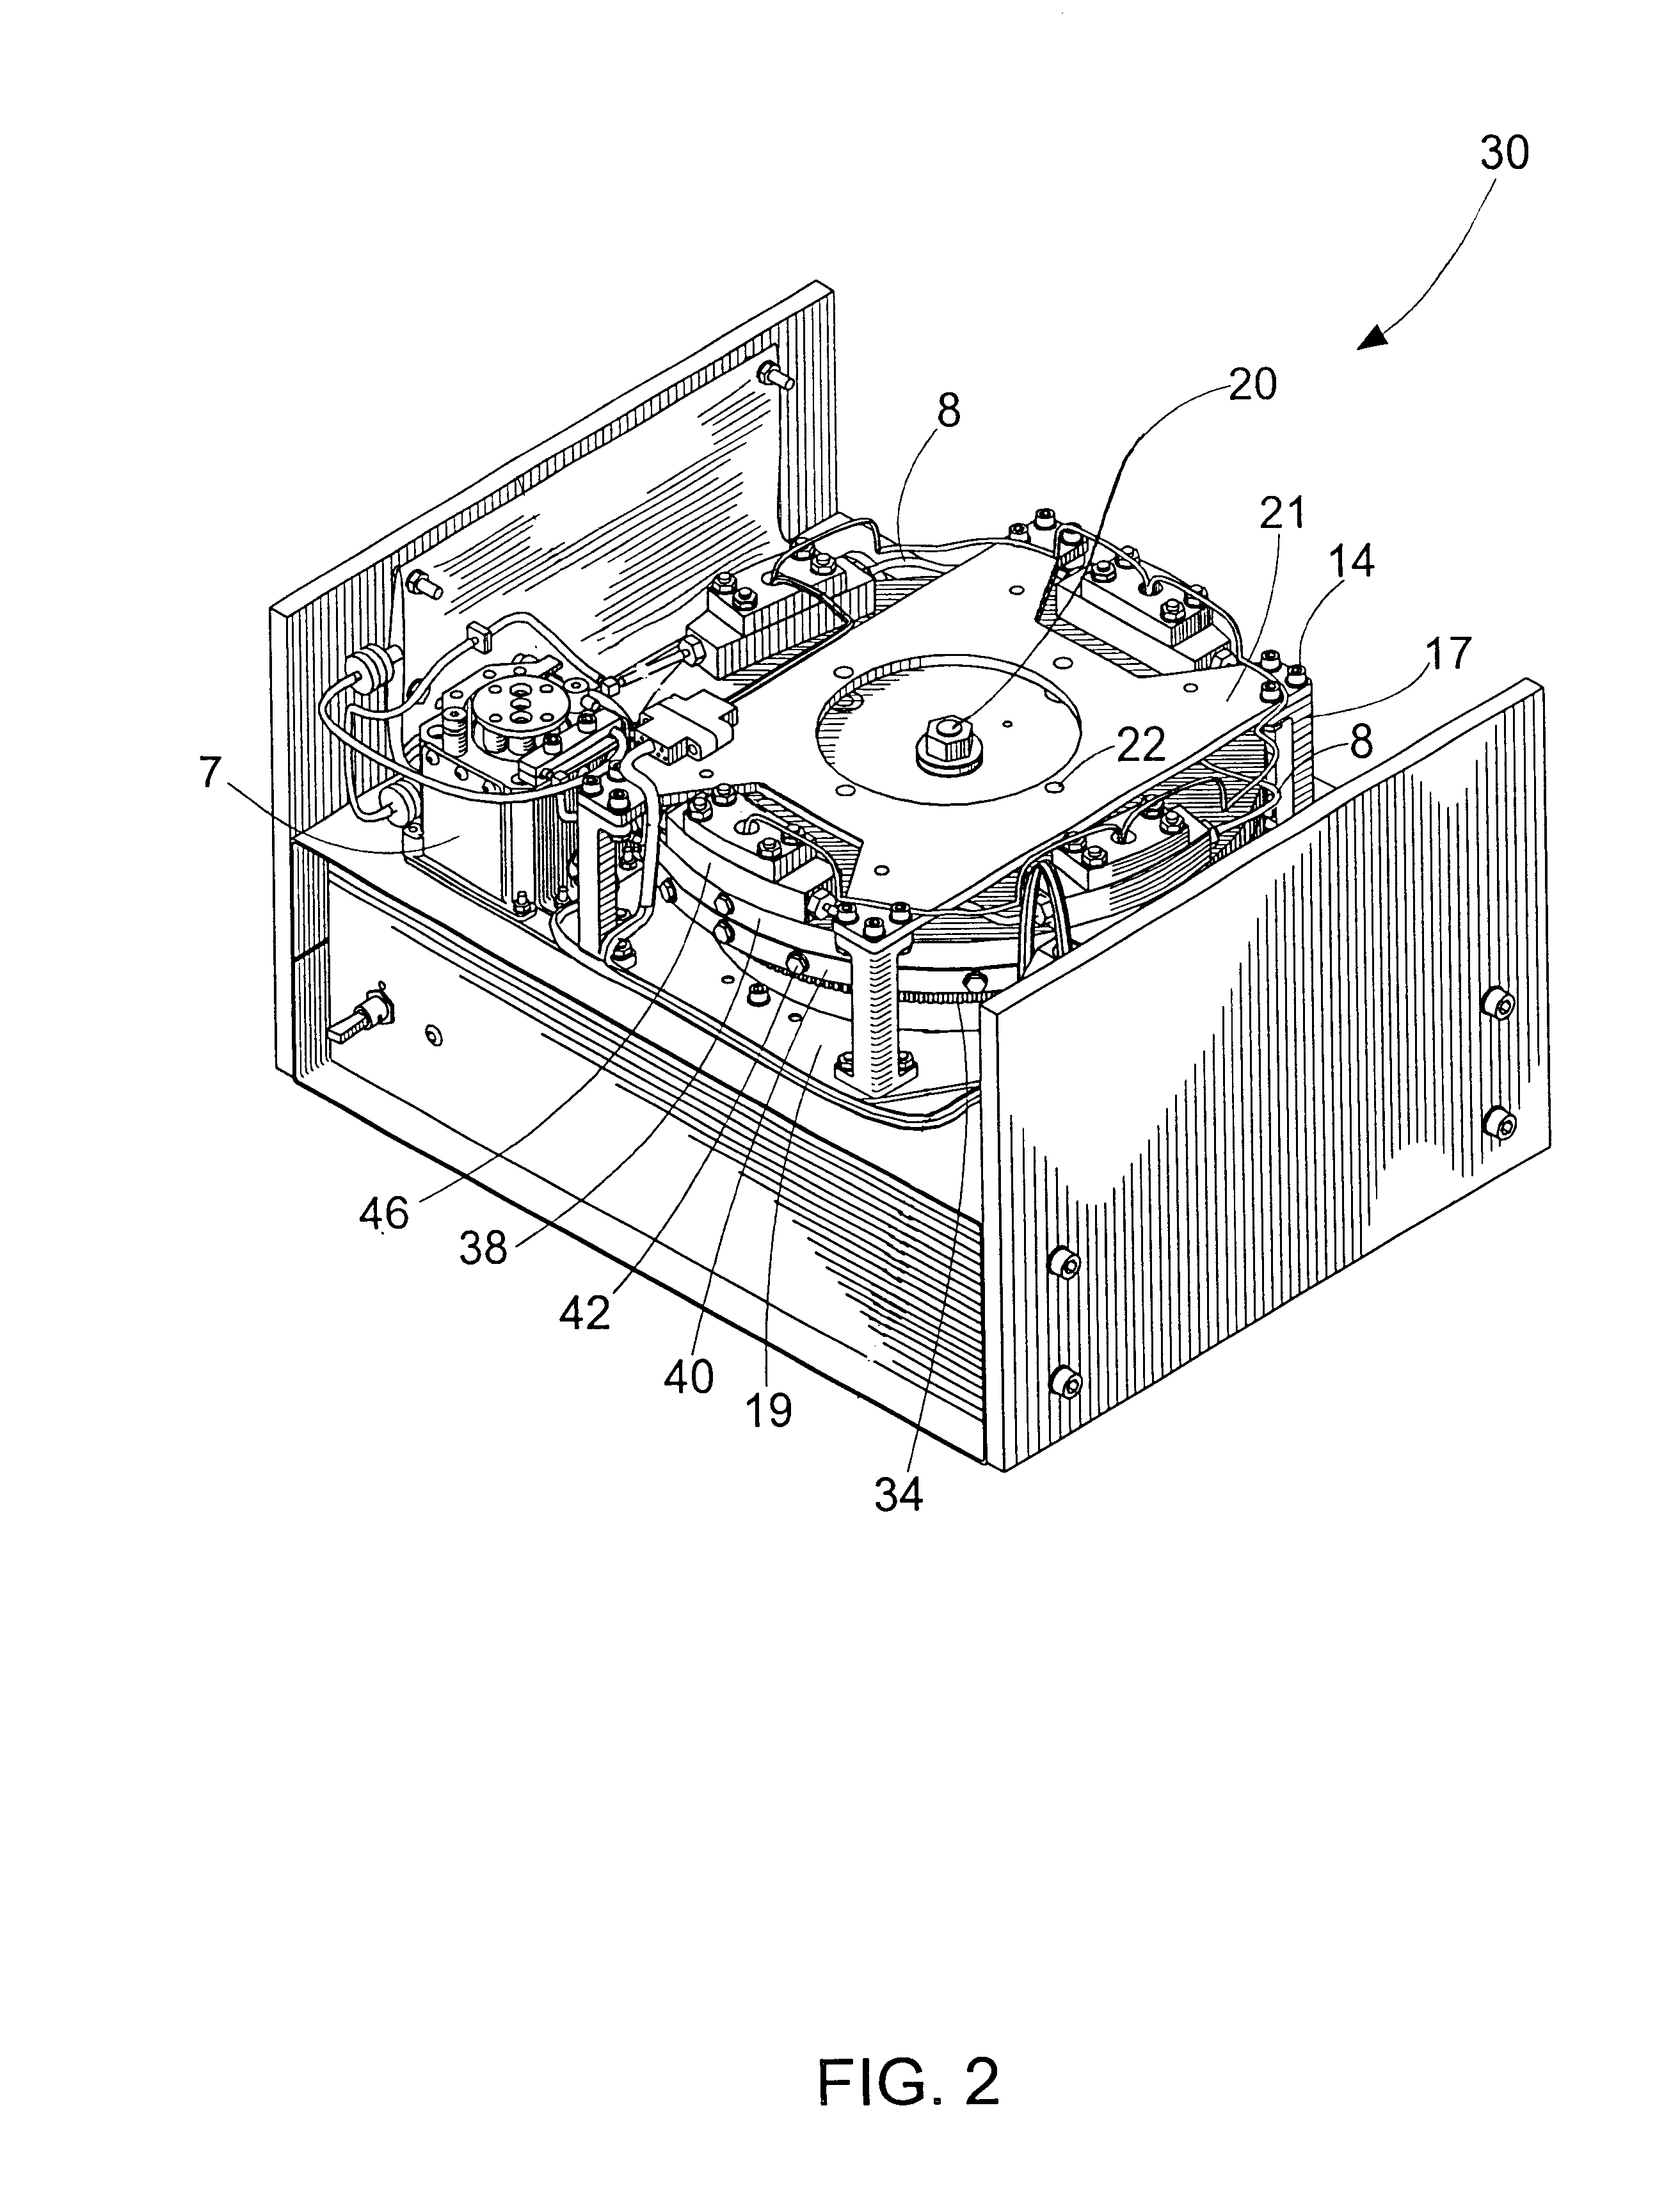 Multistage electrophoresis apparatus and method of use for the separation and purification of cells, particles and solutes